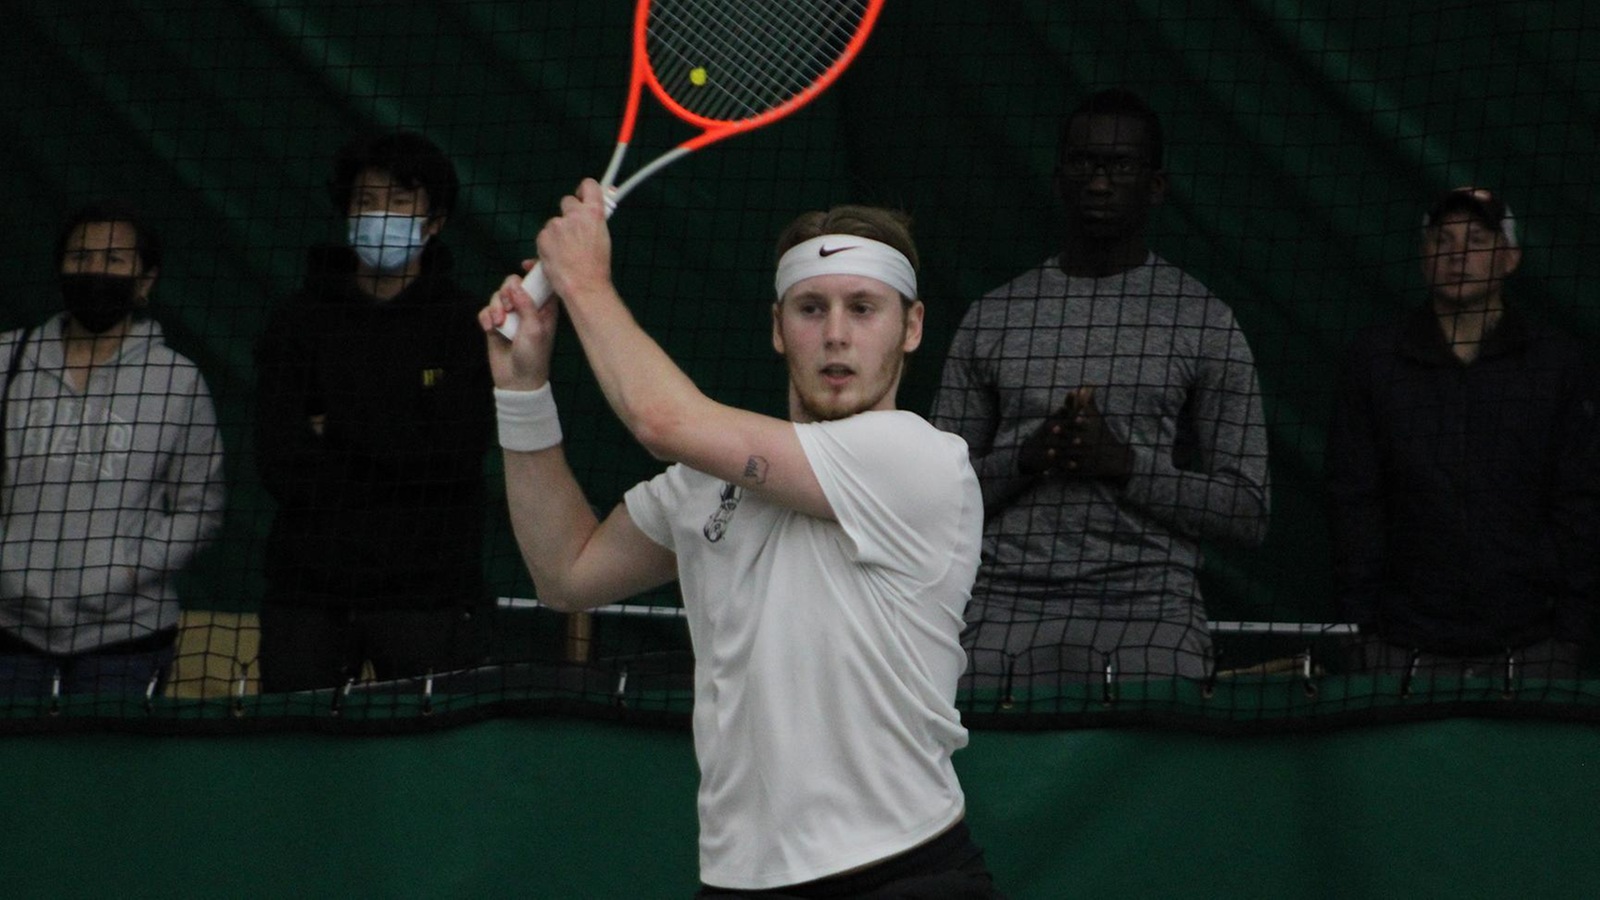 Cleveland State Men’s Tennis Has Strong First Day Of Viking Invitational